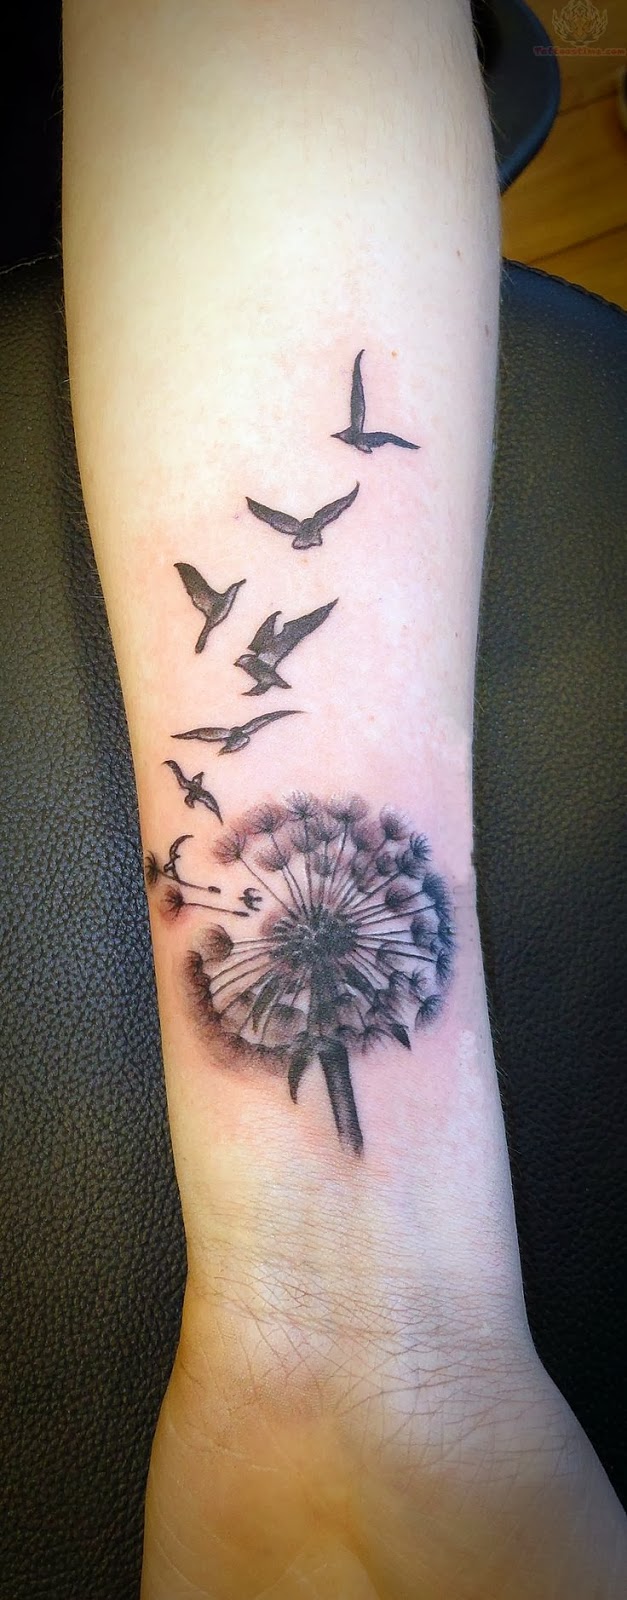 Dandelion And Birds Tattoos On Wrist...I love this idea, but with butterflies for my angels